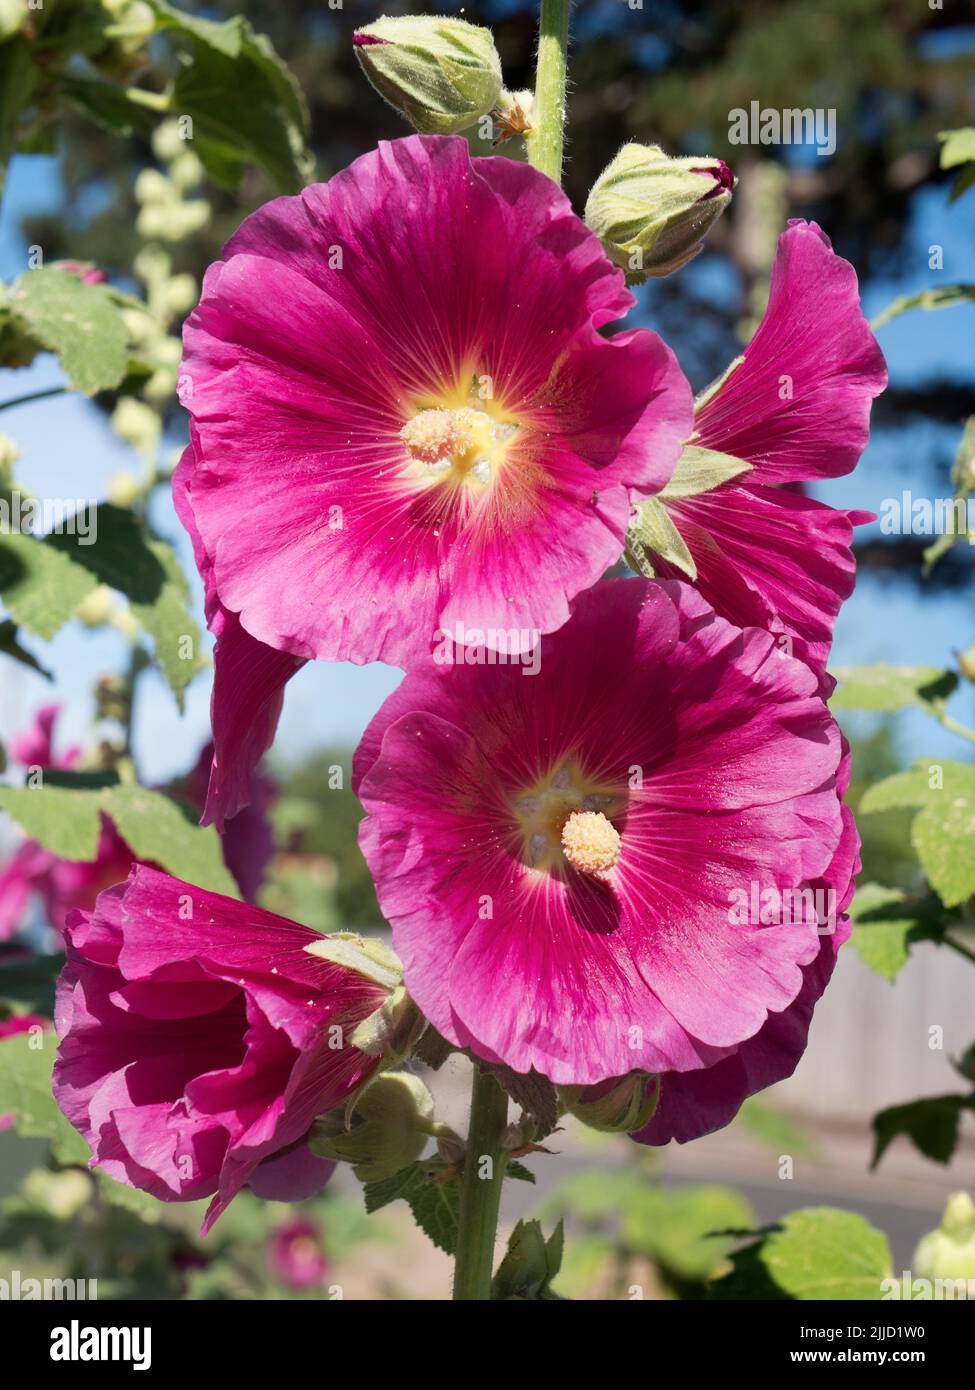 This fine scarlet Rose Mallow puts on a fine show every year in our garden. Rose mallow (Hibiscus moscheutos) is a large, fast-growing, cold hardy rel Stock Photo